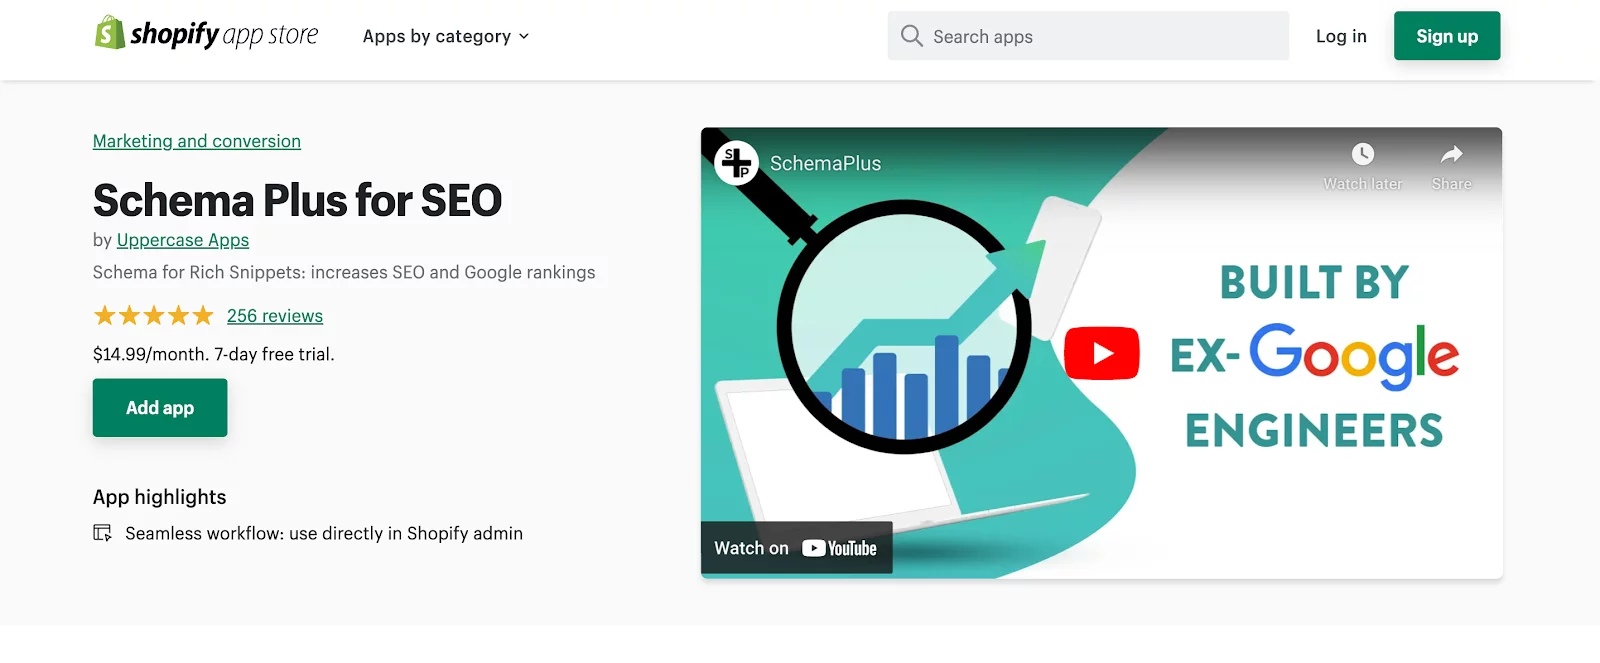 Shopify SEO Apps - Schema plus for SEO